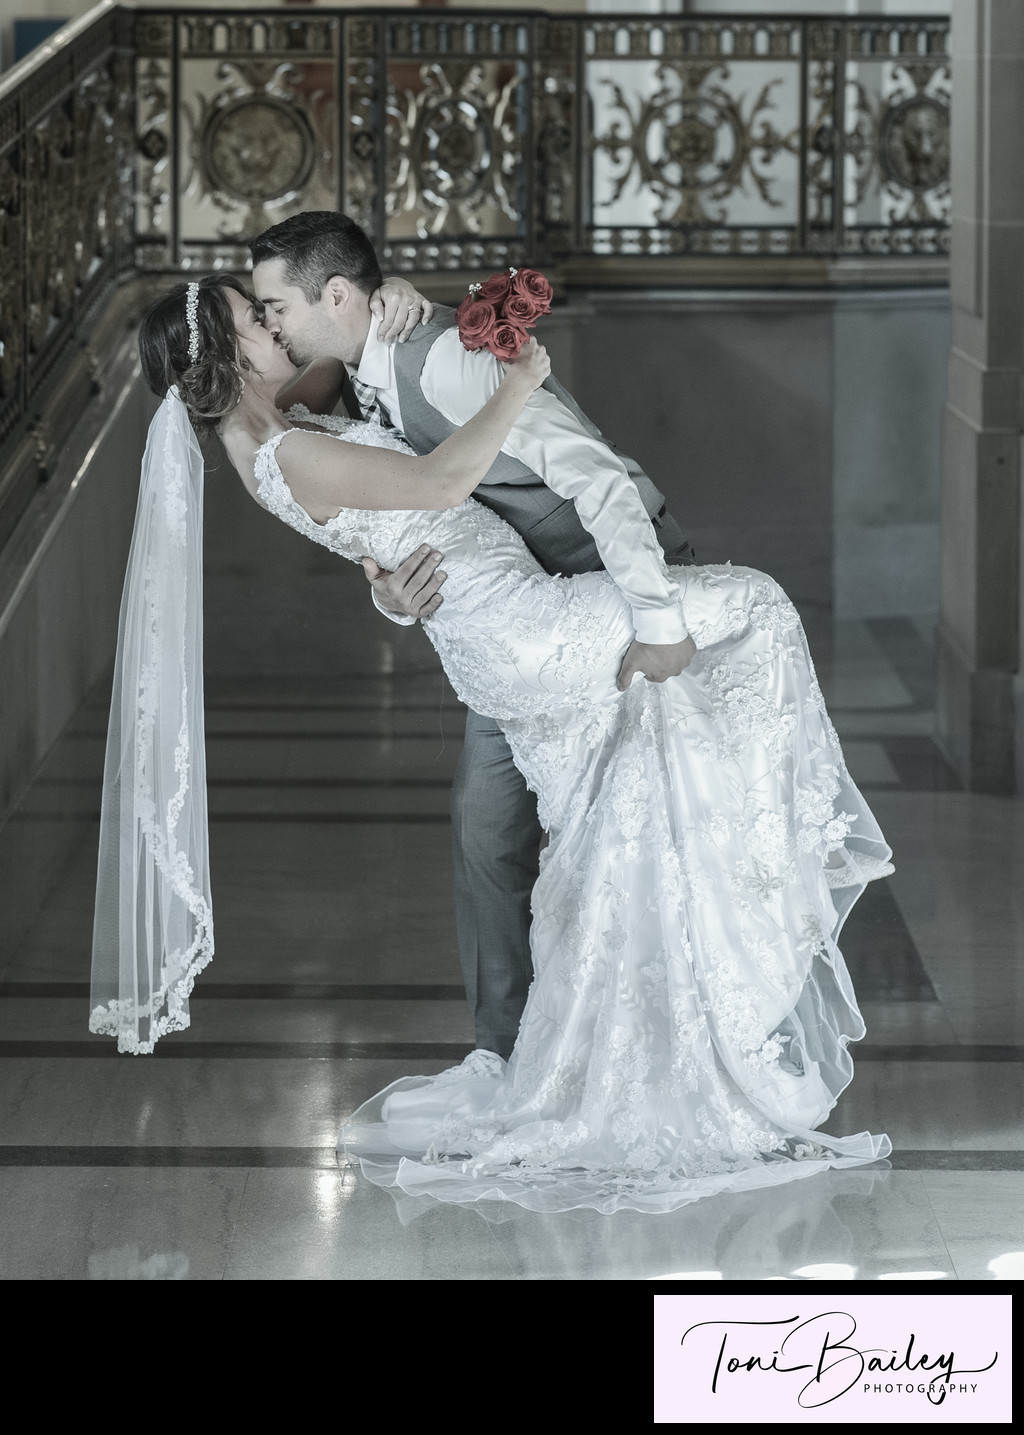 Kiss in the hallway with red roses